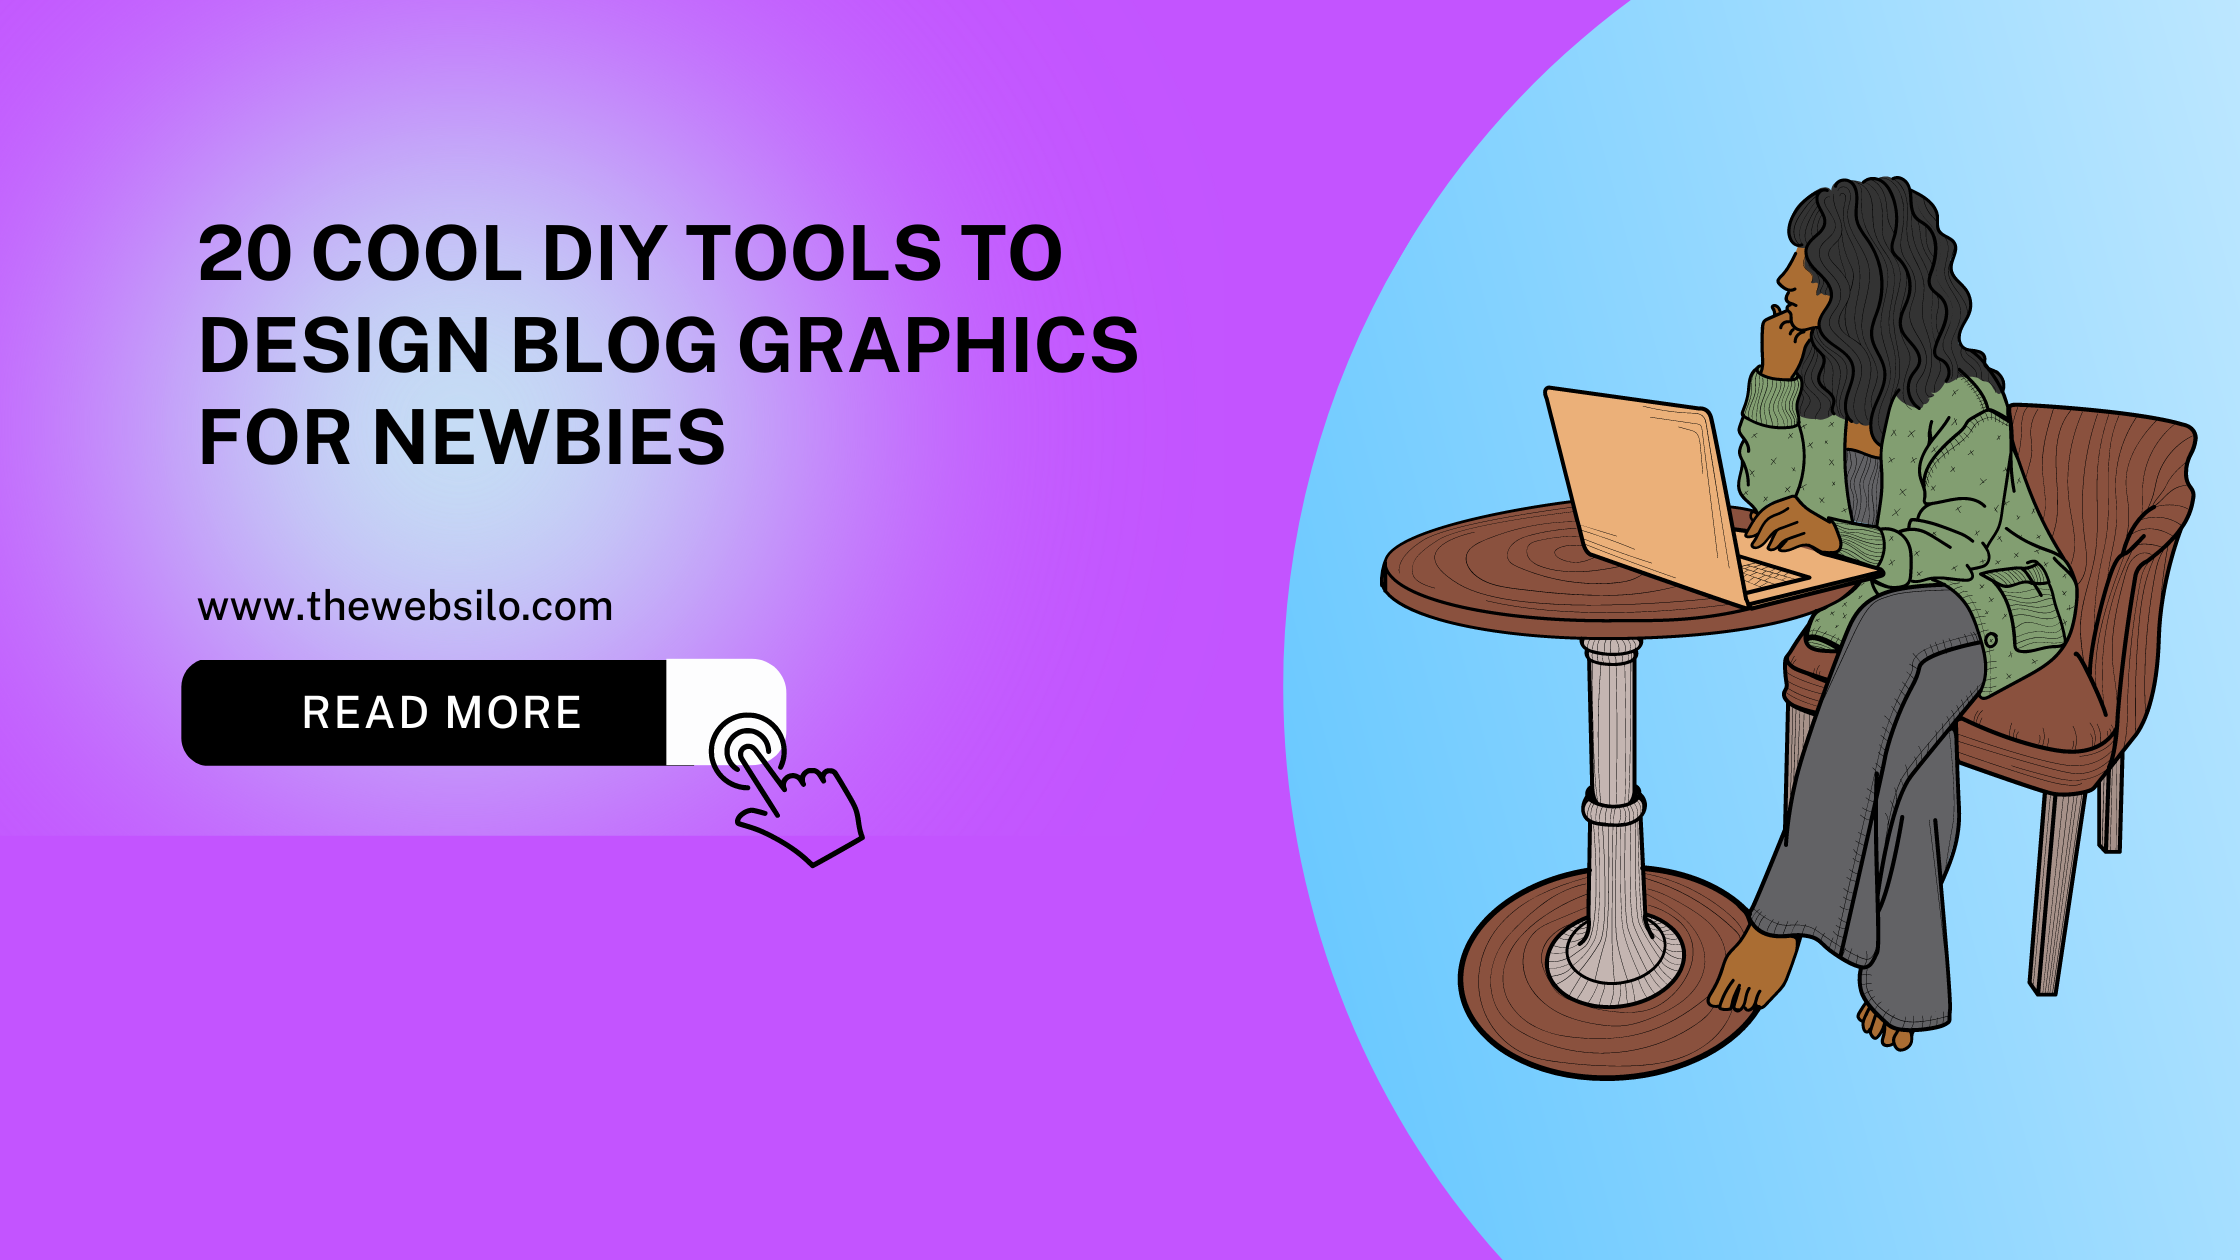 20 Cool DIY Tools To Design Blog Graphics for Newbies